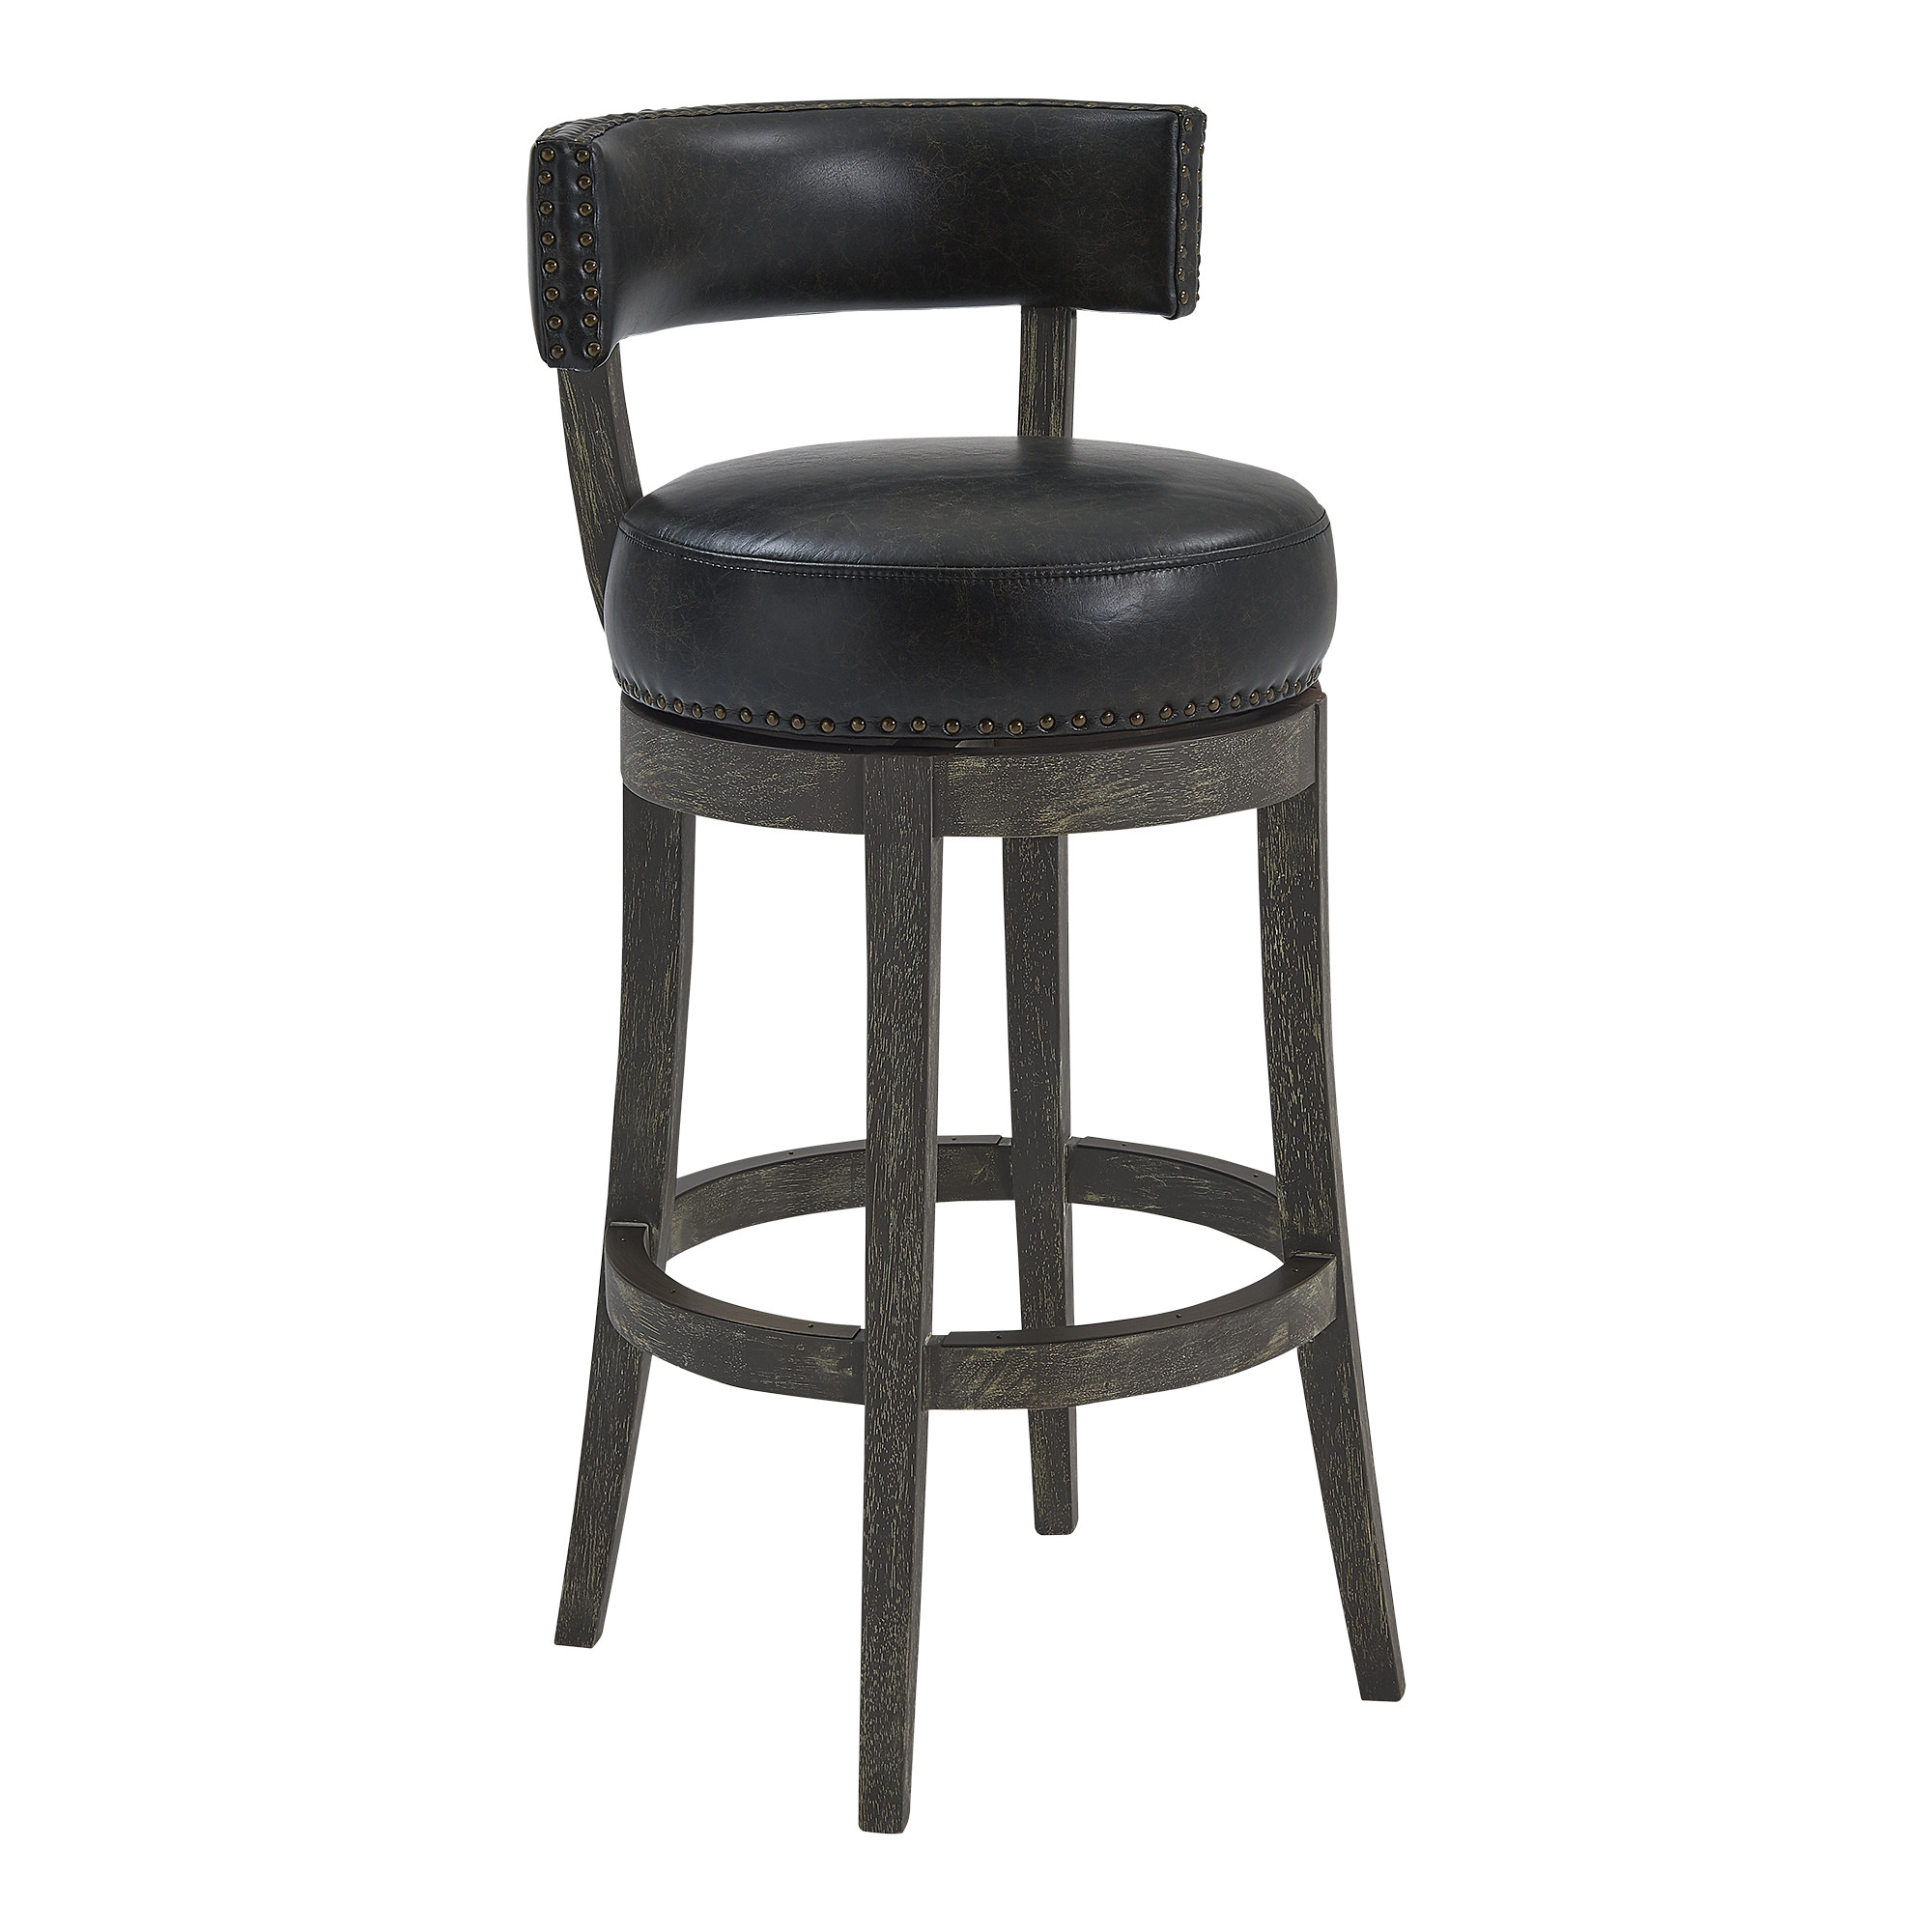 30" Brown Onyx Faux Leather Swivel Counter Stool